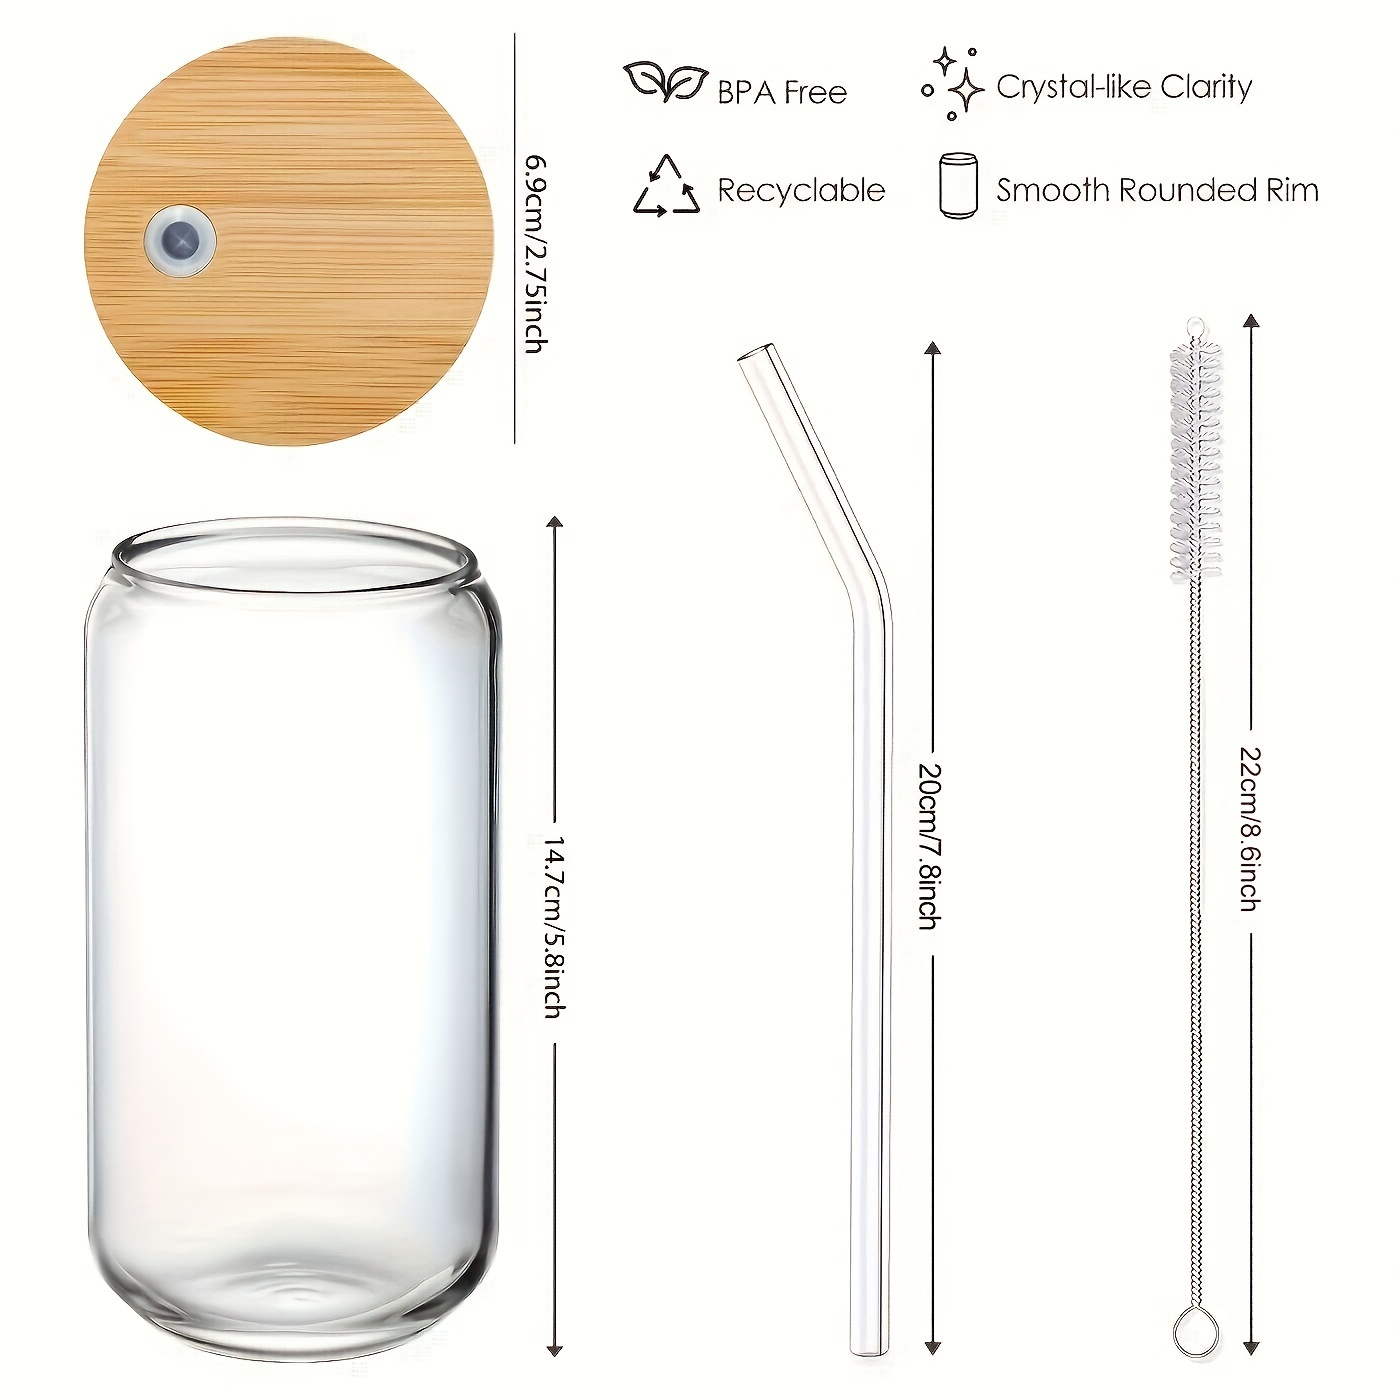 Eco-Friendly Glass Tumbler Set with Bamboo Lid & Straw (2 Sizes, 4 Sty